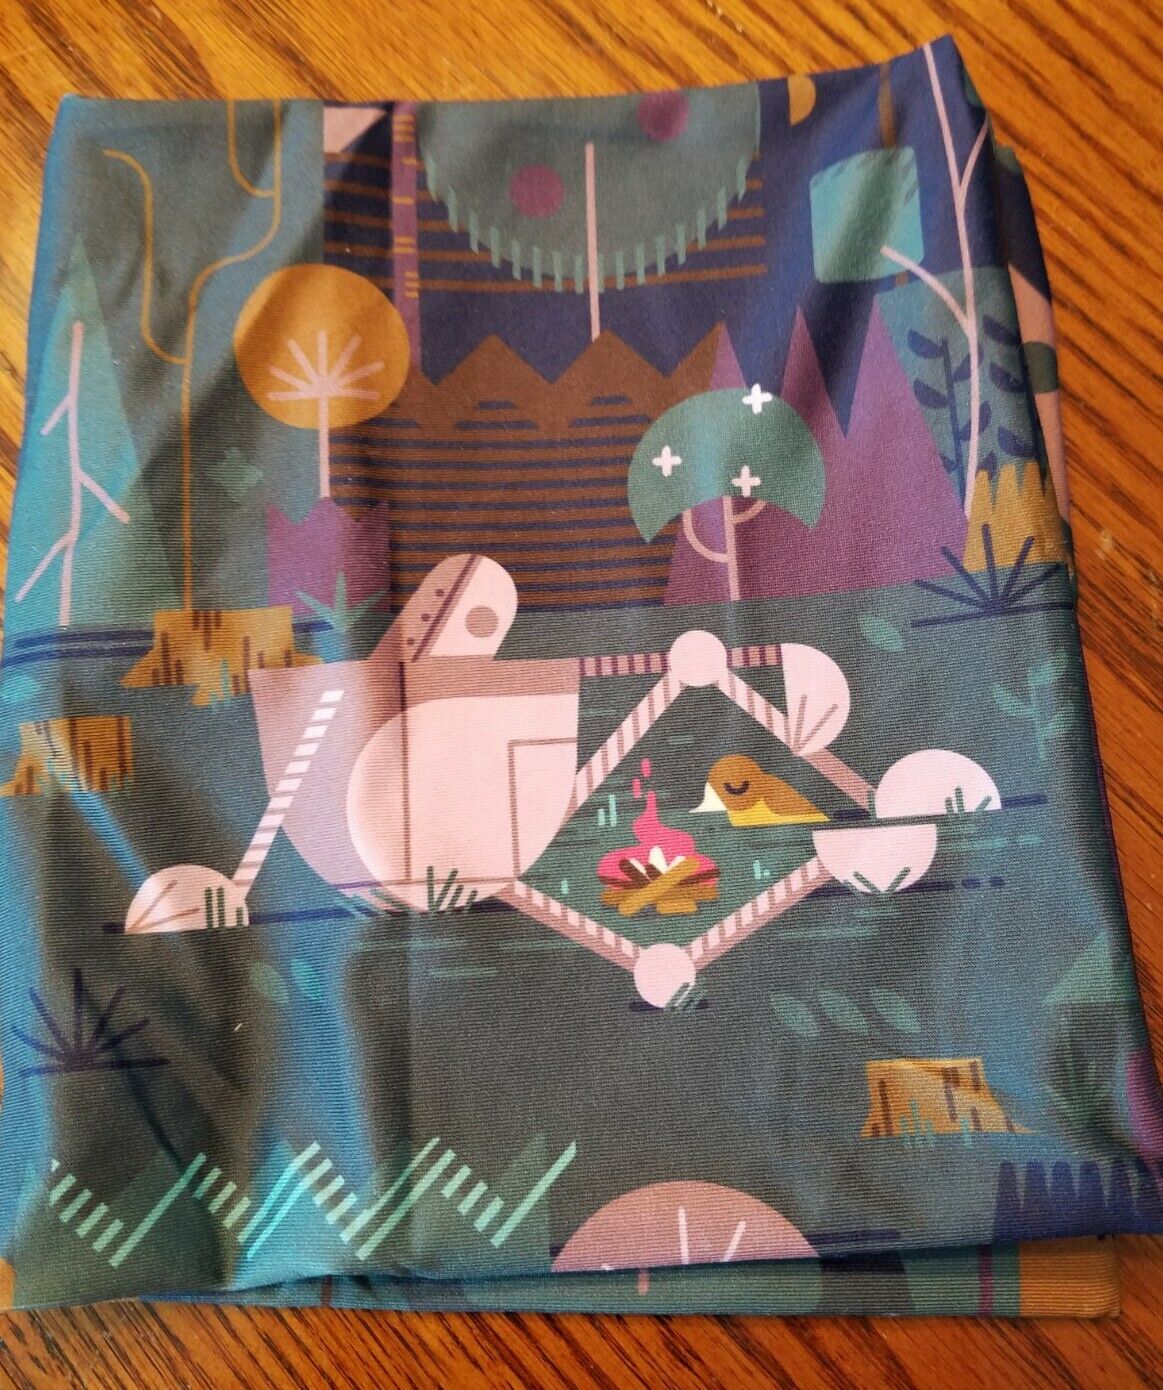 Owlcrate Jr Exclusive, Wild Robot Inspired Fabric Book Cover by Shafer Brown